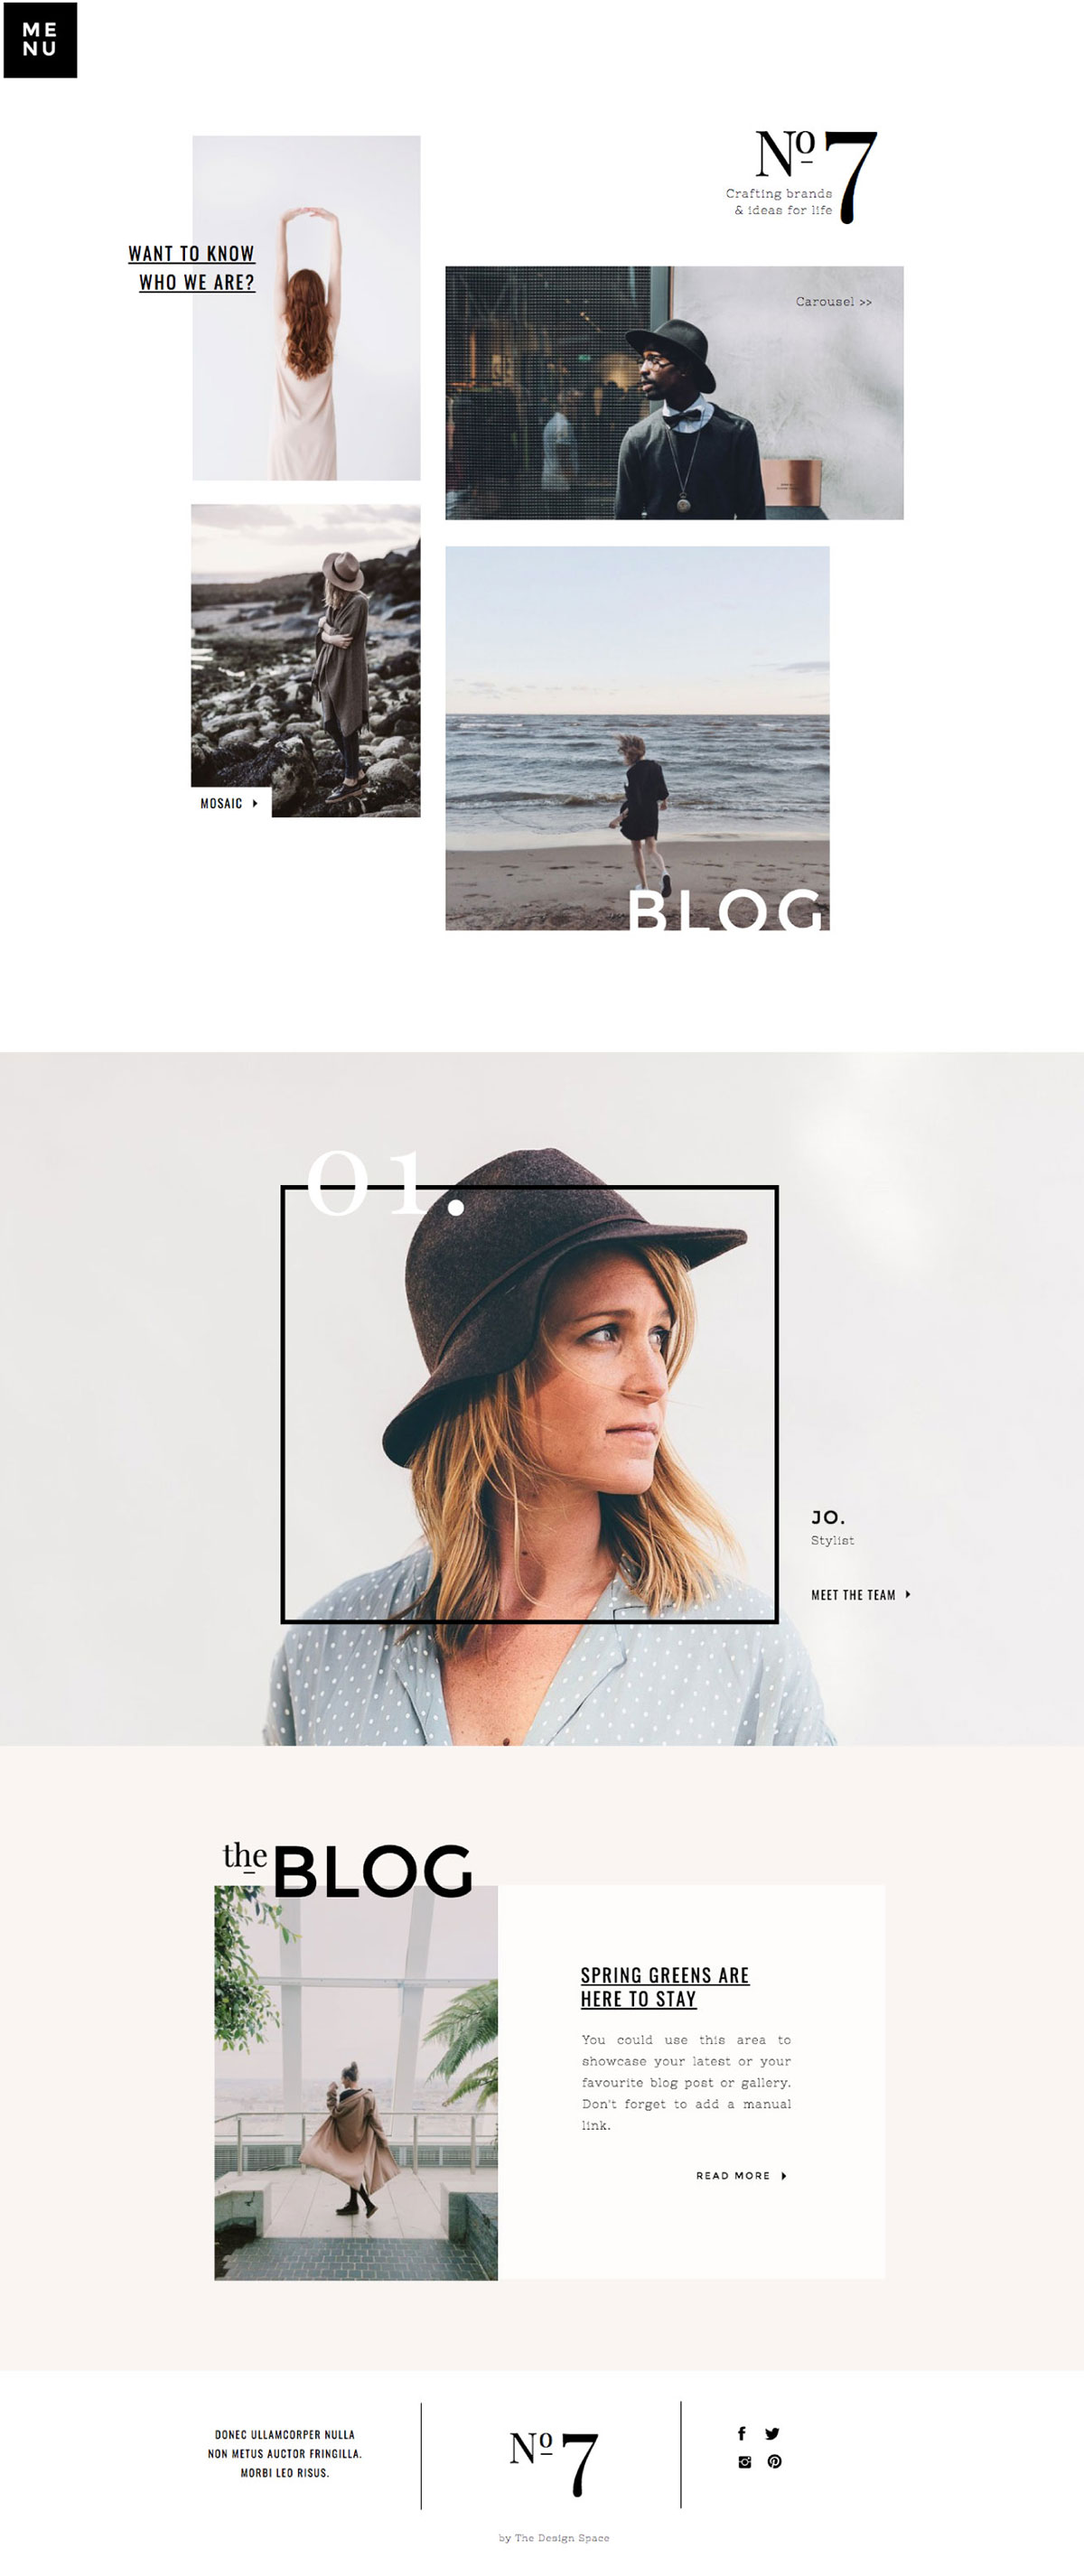 Free Showit Design Template - No. 7